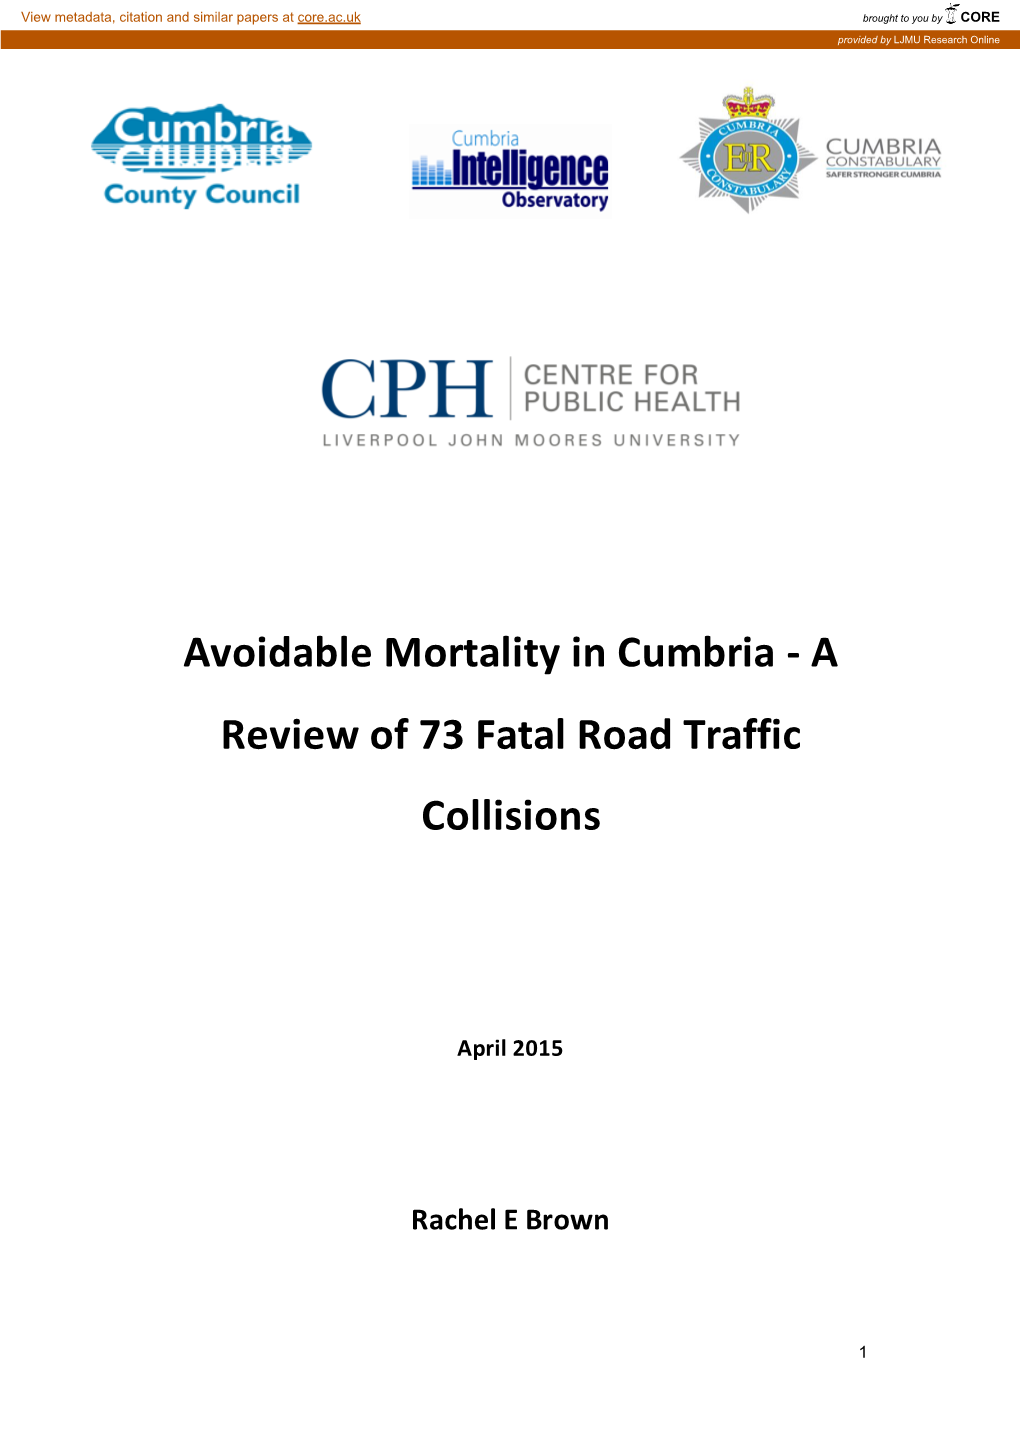 Avoidable Mortality in Cumbria - a Review of 73 Fatal Road Traffic Collisions